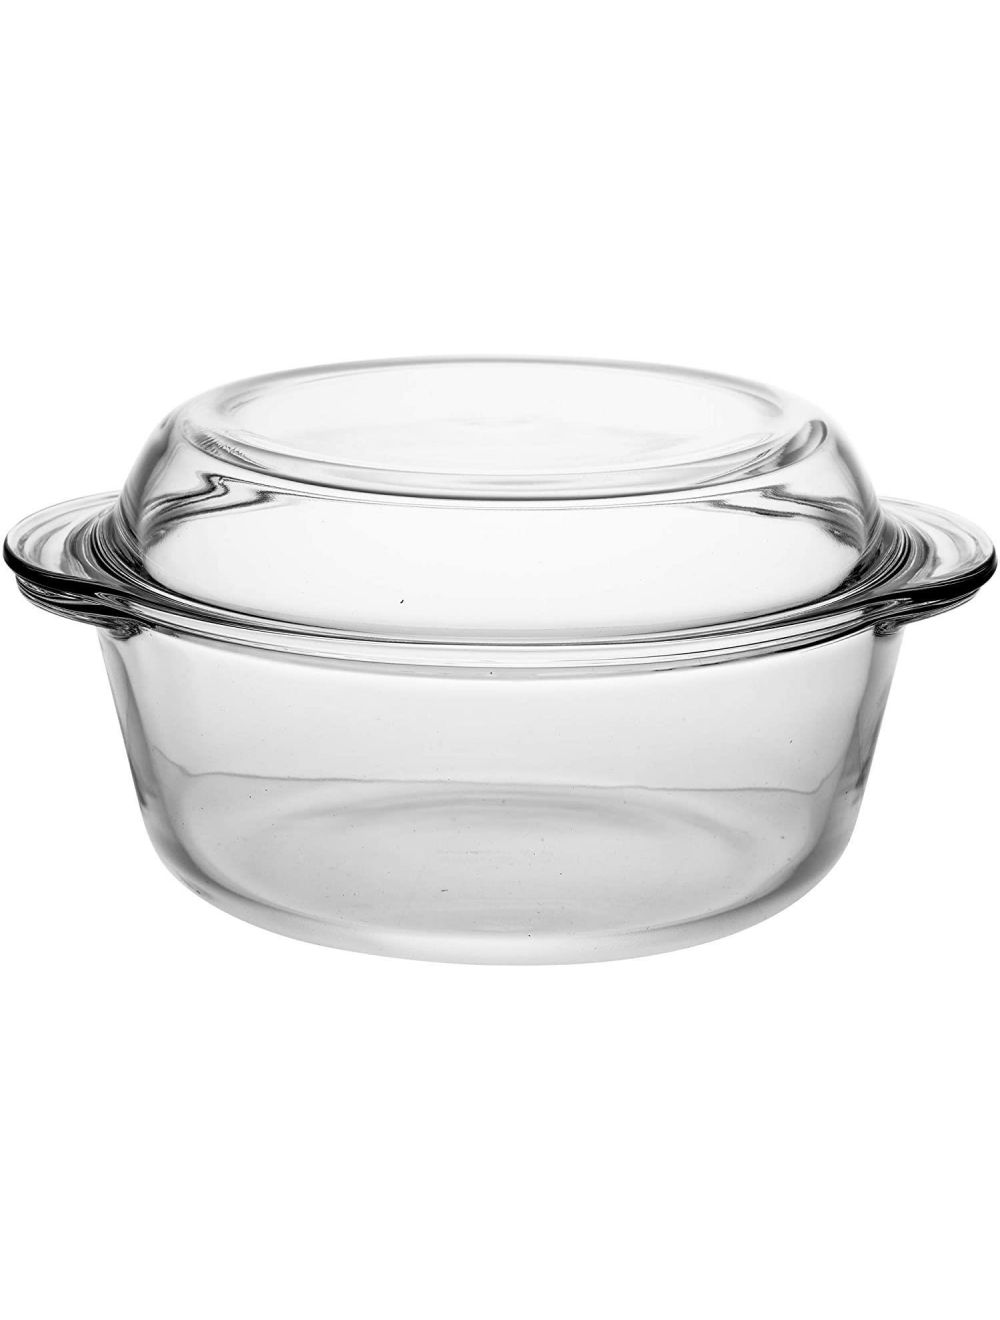 1.5 Litres Microwave Safe Casserole Round Glass Oven Dish Bakeware with Lid